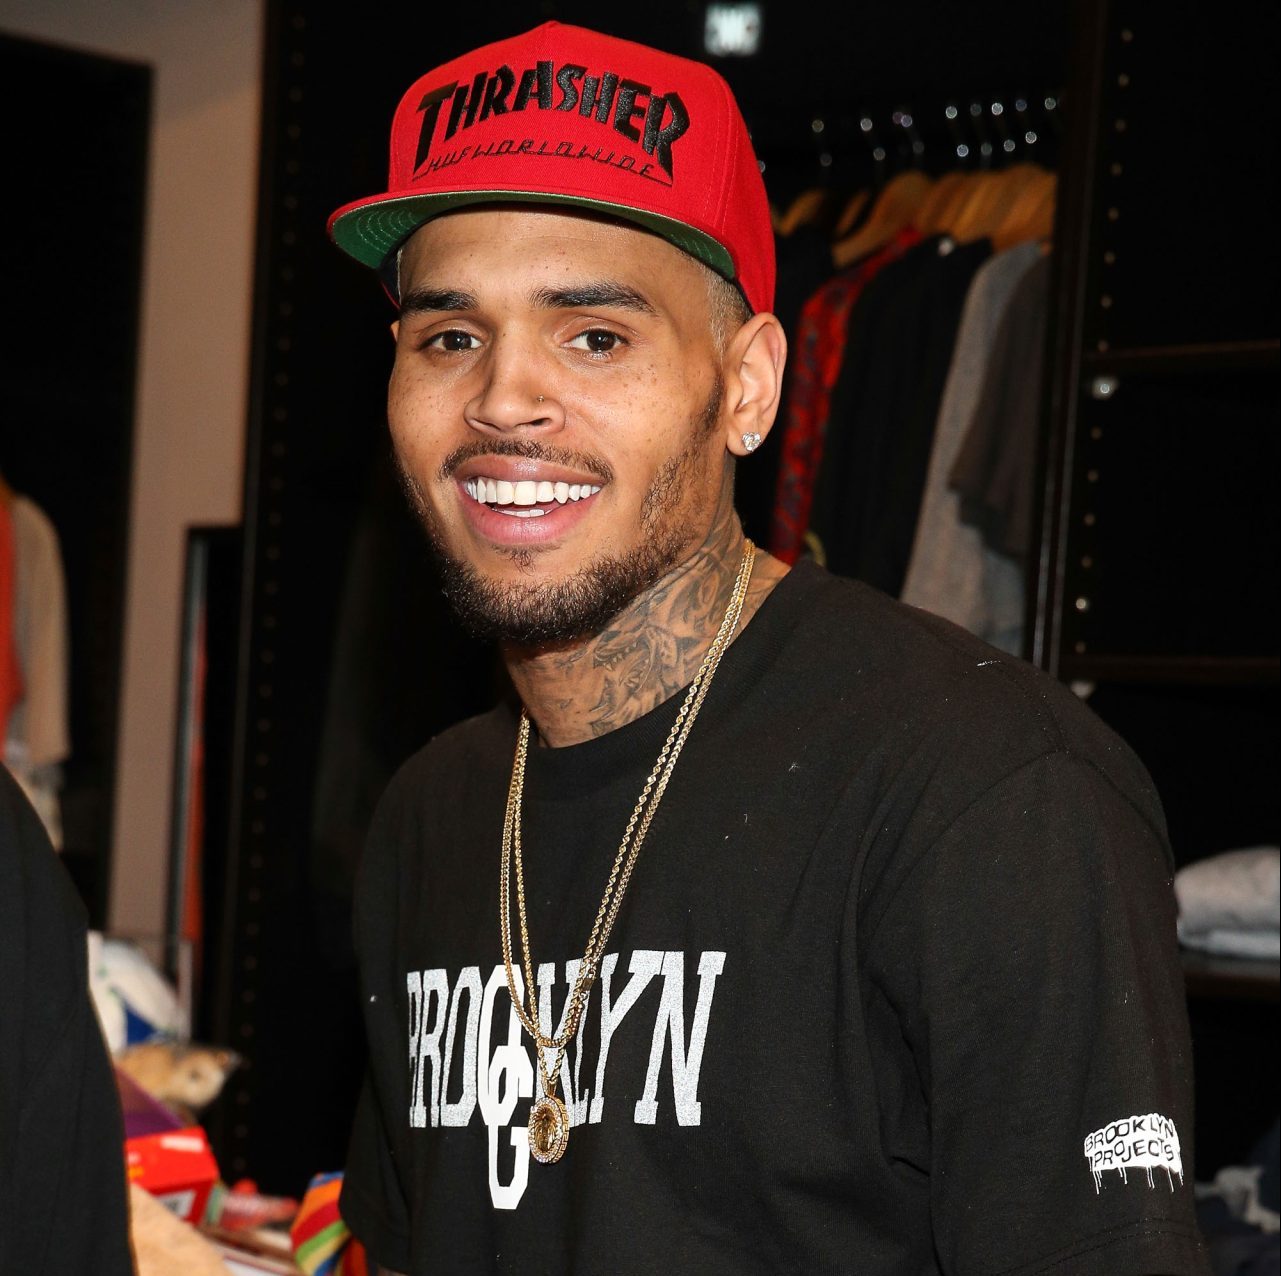 Chris Brown Shares The Tracklist For His New Album ‘Breezy’